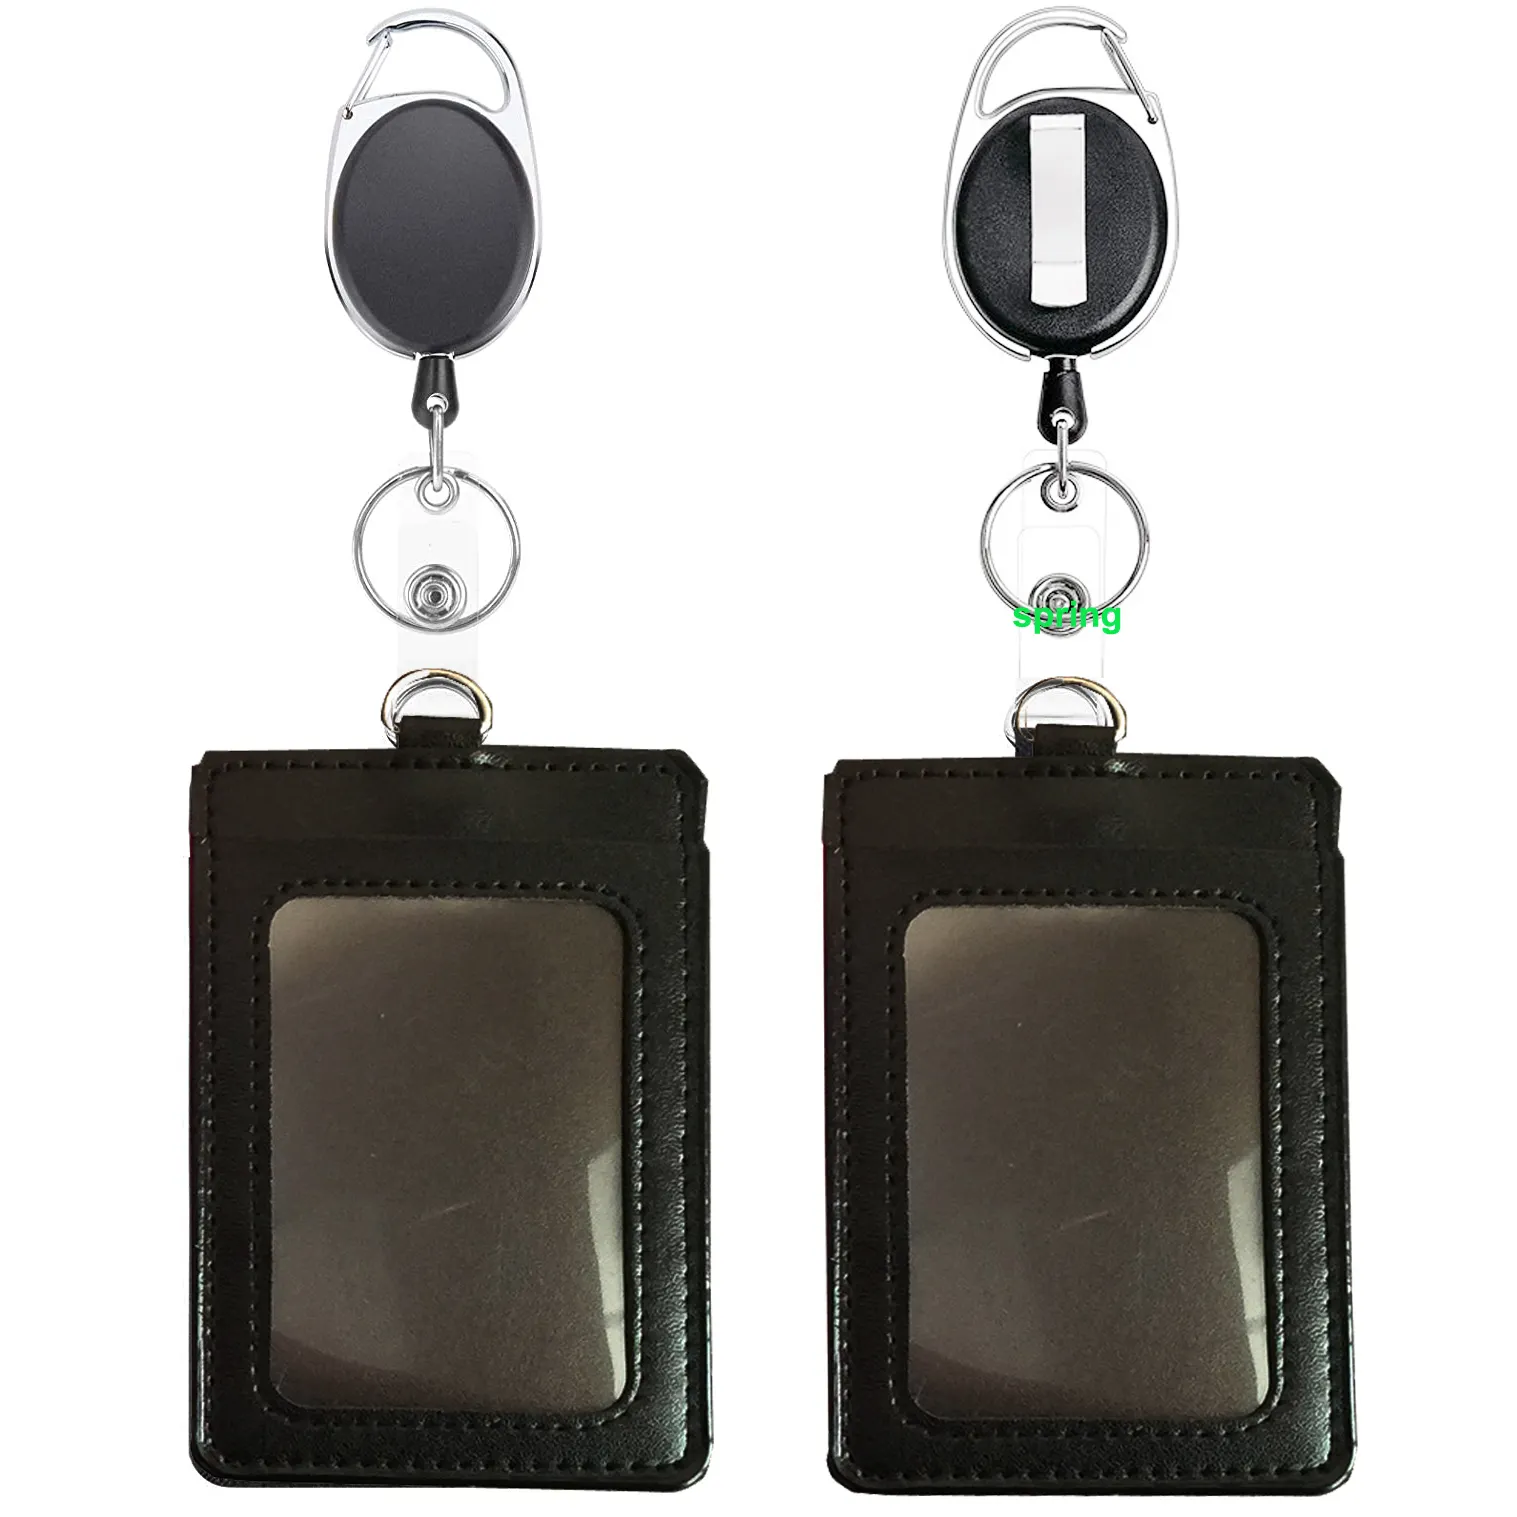 Vertical PU Leather ID Badge Card Holder Retractable Badge Reel Clip Keychain, Lanyard for ID Card Name Tag Holders Keys Set